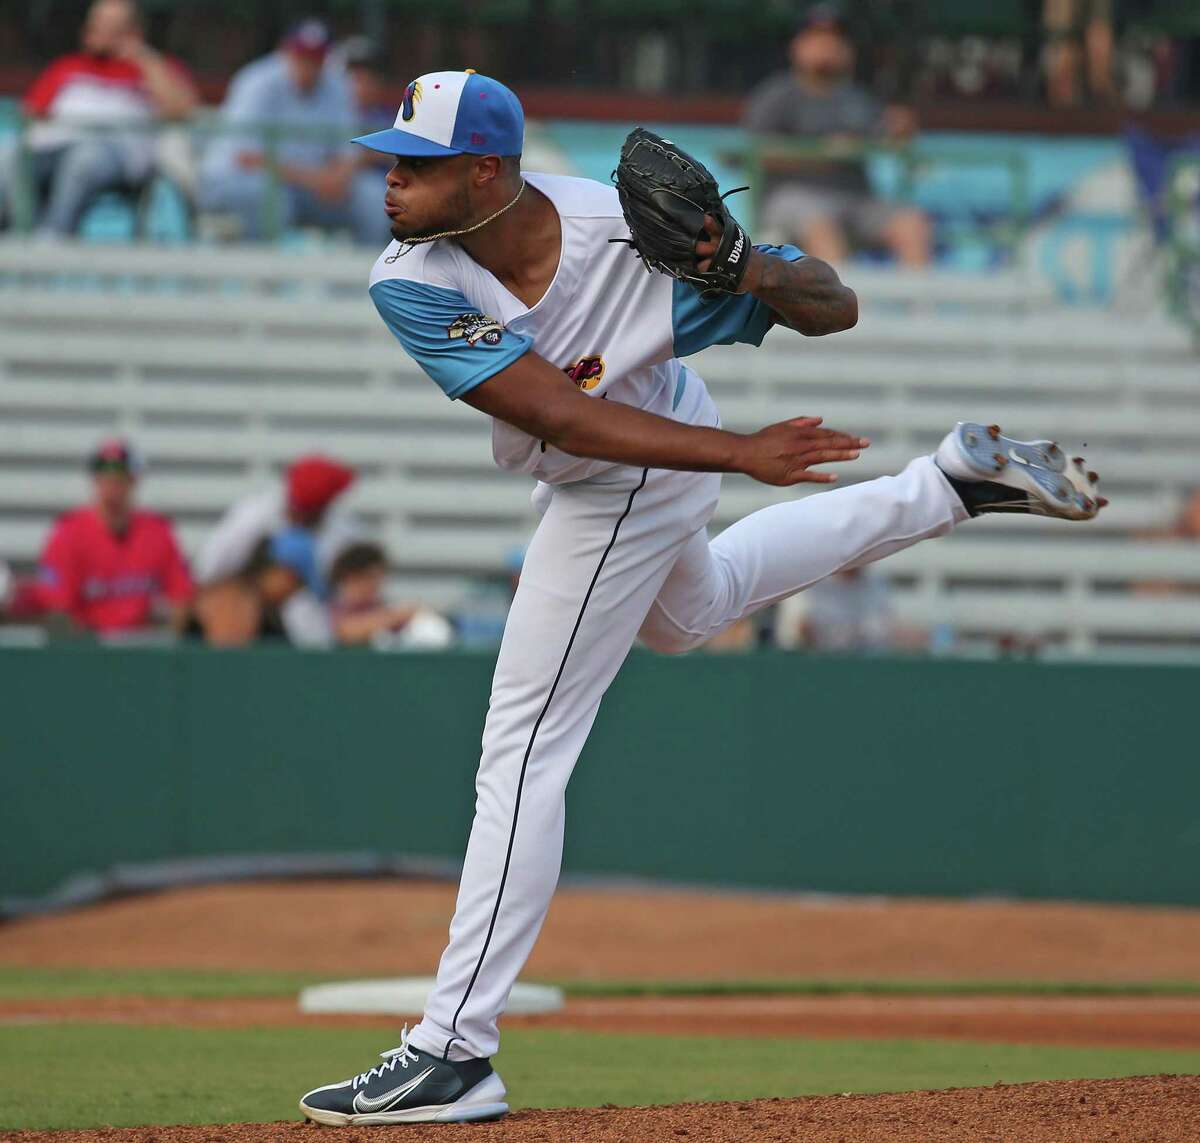 Flying Chancelas de San Antonio pitcher Reggie Lawson (45) delivers a throw in the first inning. San Antonio Missions (Flying Chanclas) were defeated by Midland Rockhounds 3-0 on Thursday, May 19, 2022 Wolff Stadium.